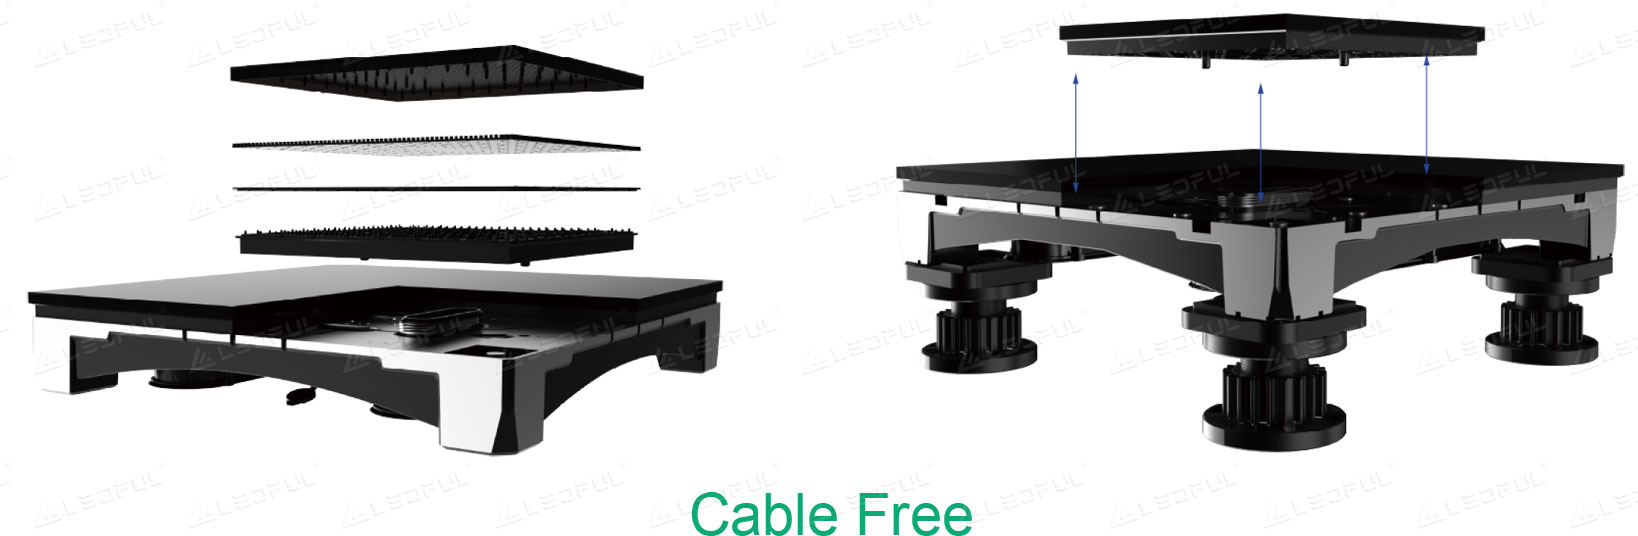 Integrated Design Cable Free